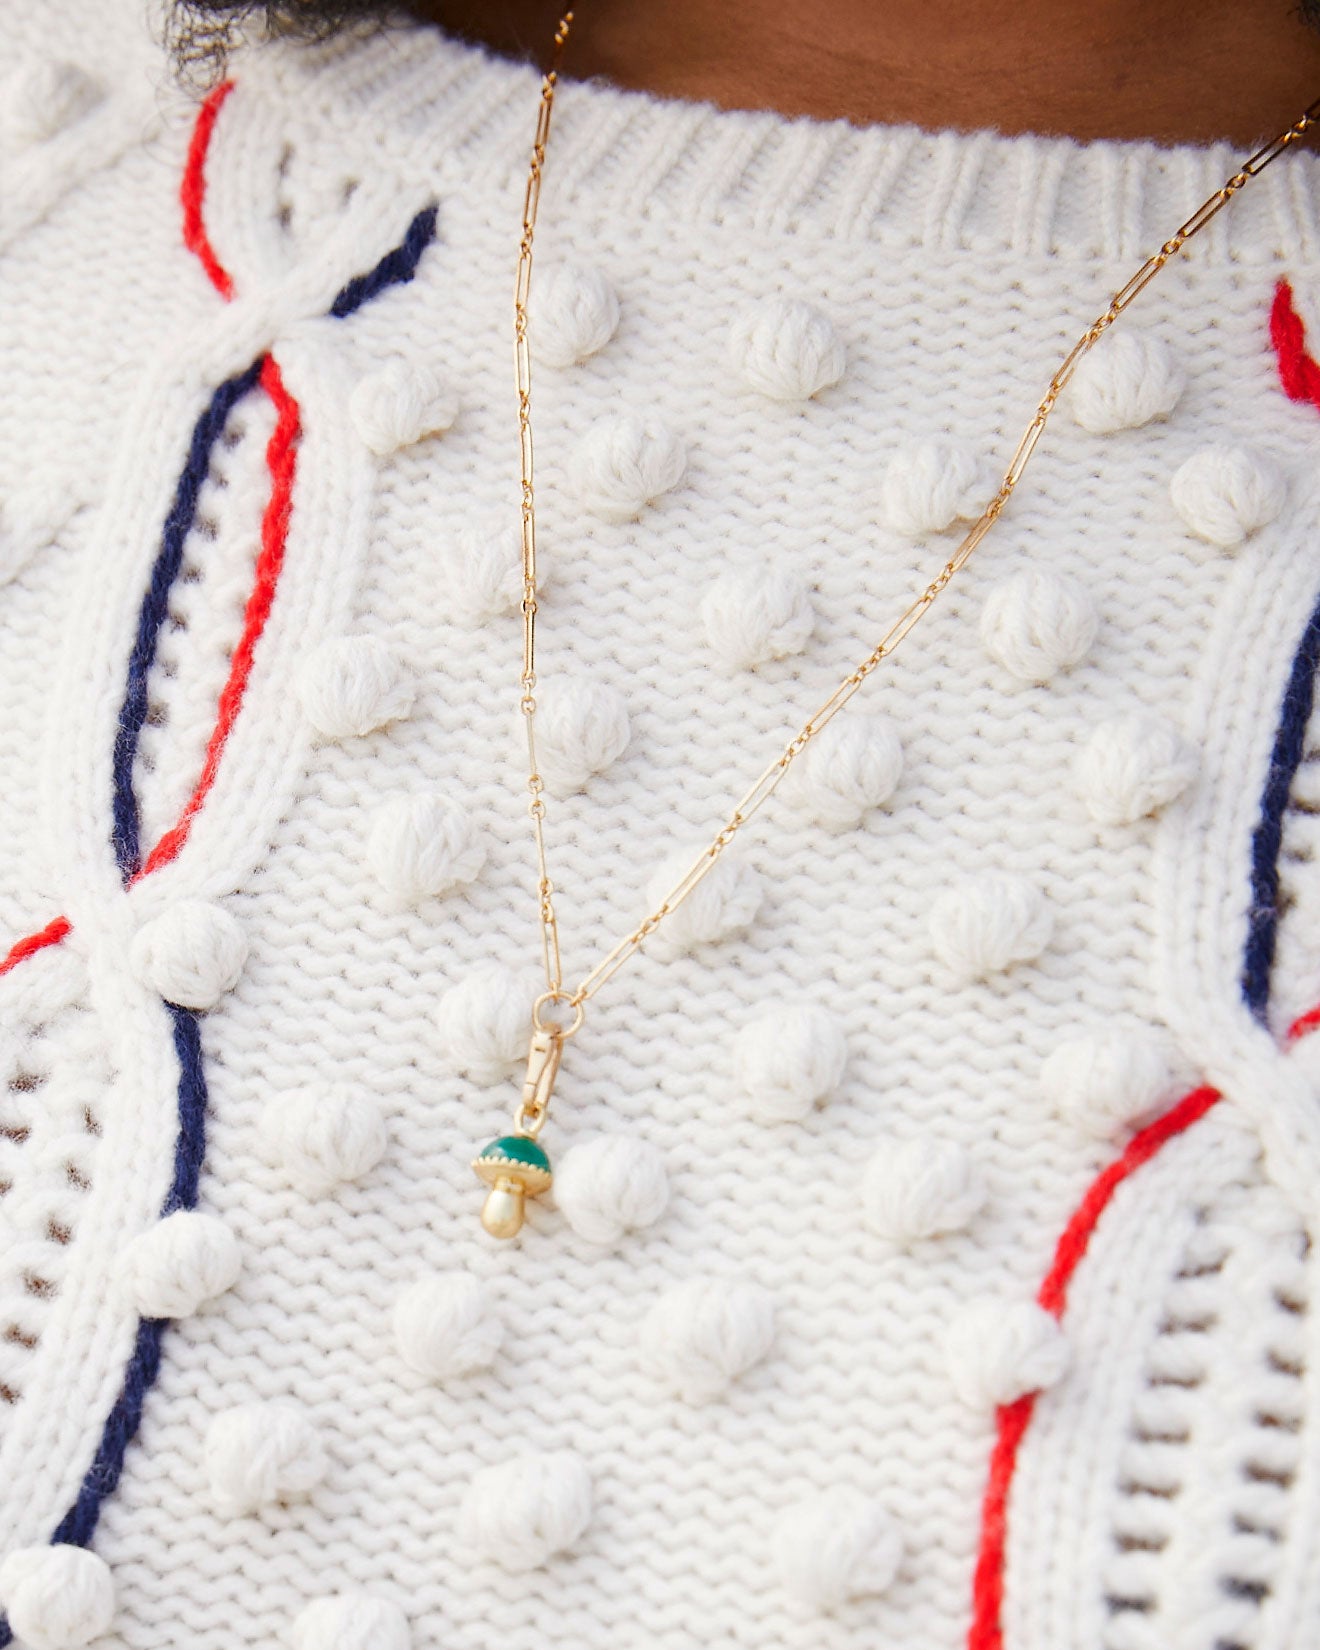 Candace Wearing the Green w/ Vintage Gold Mushroom Charm on the Paperclip Chain Necklace